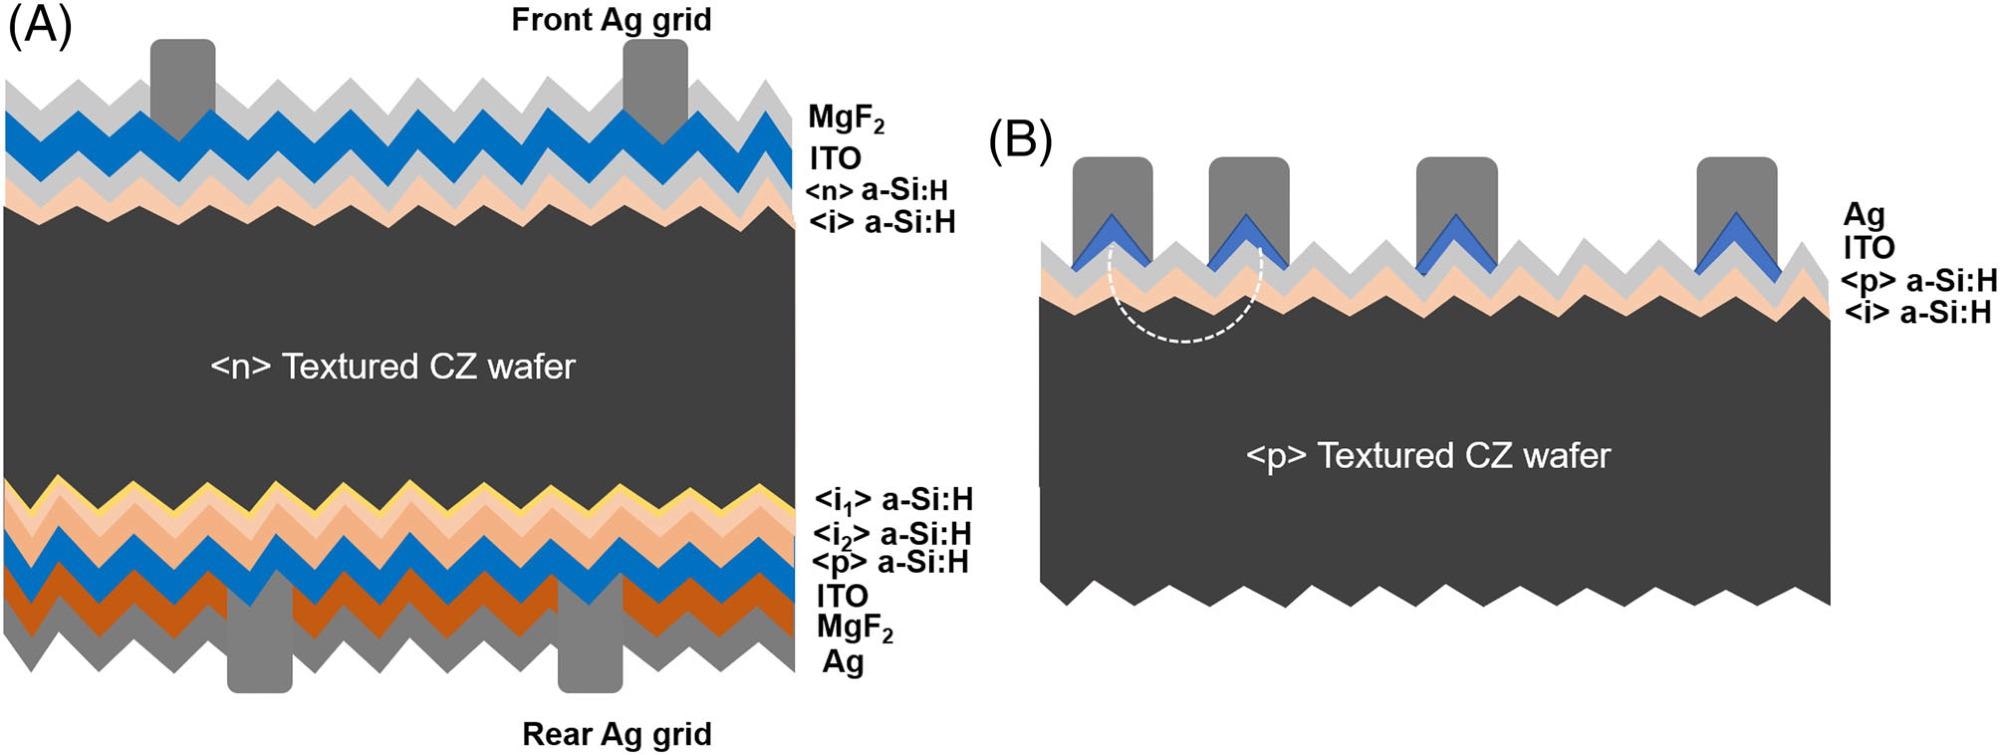 (A) Cross-sectional sketch of the certified SHJ solar cell and (B) TLM pattern structure